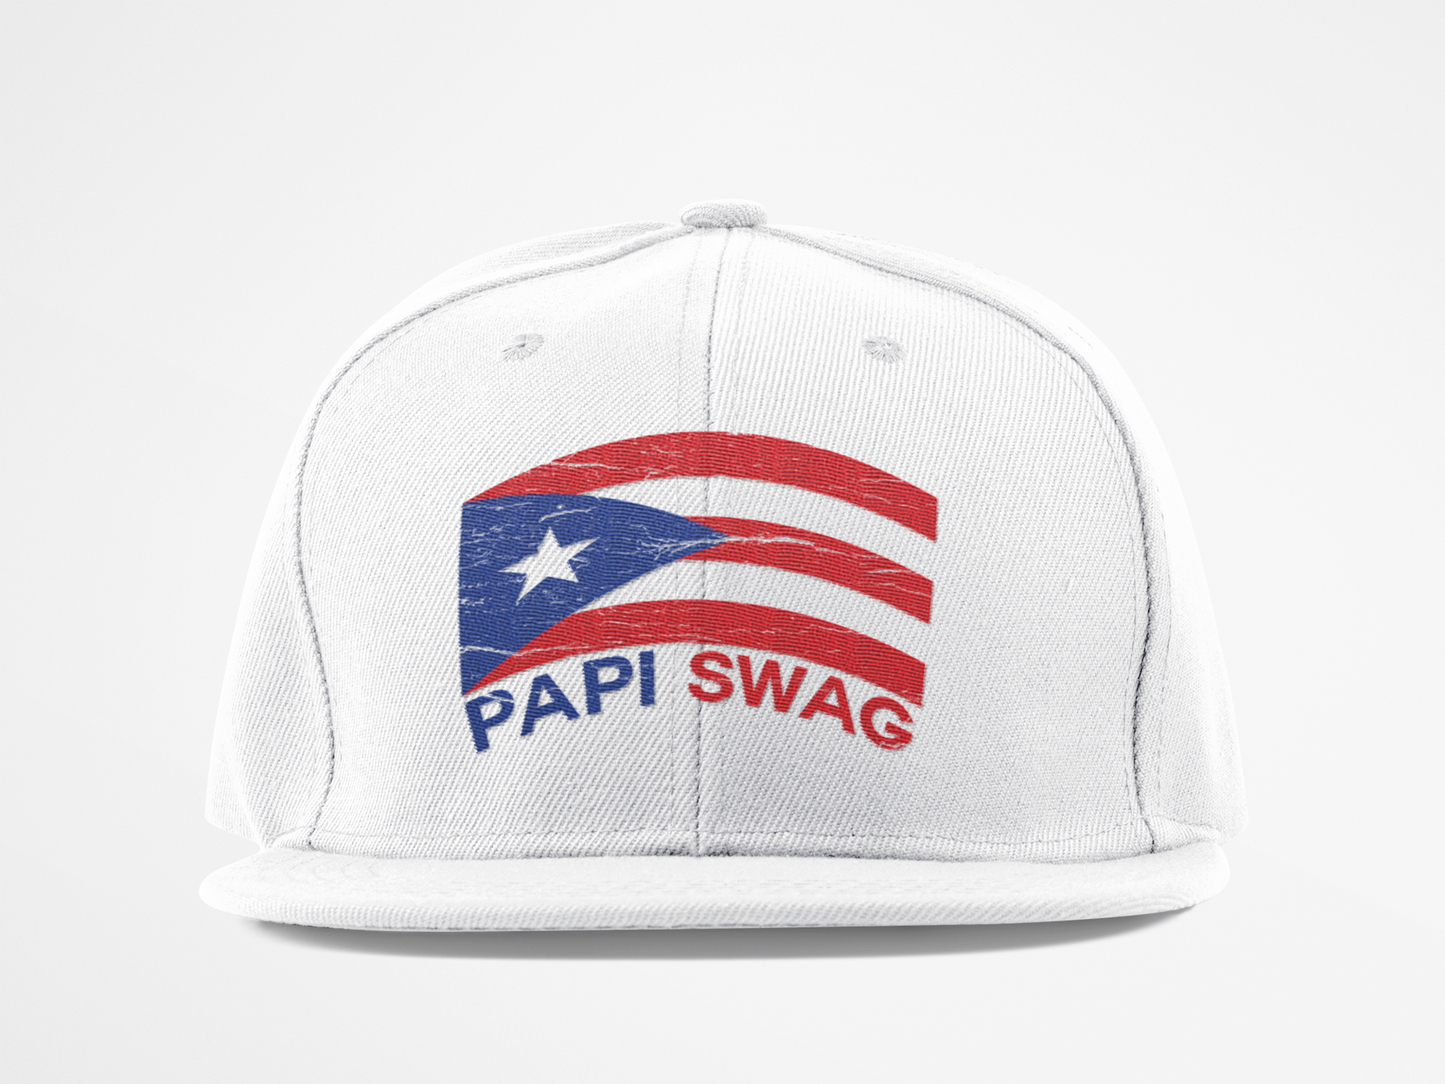 Daddy Swag Papi Swag Snap-back